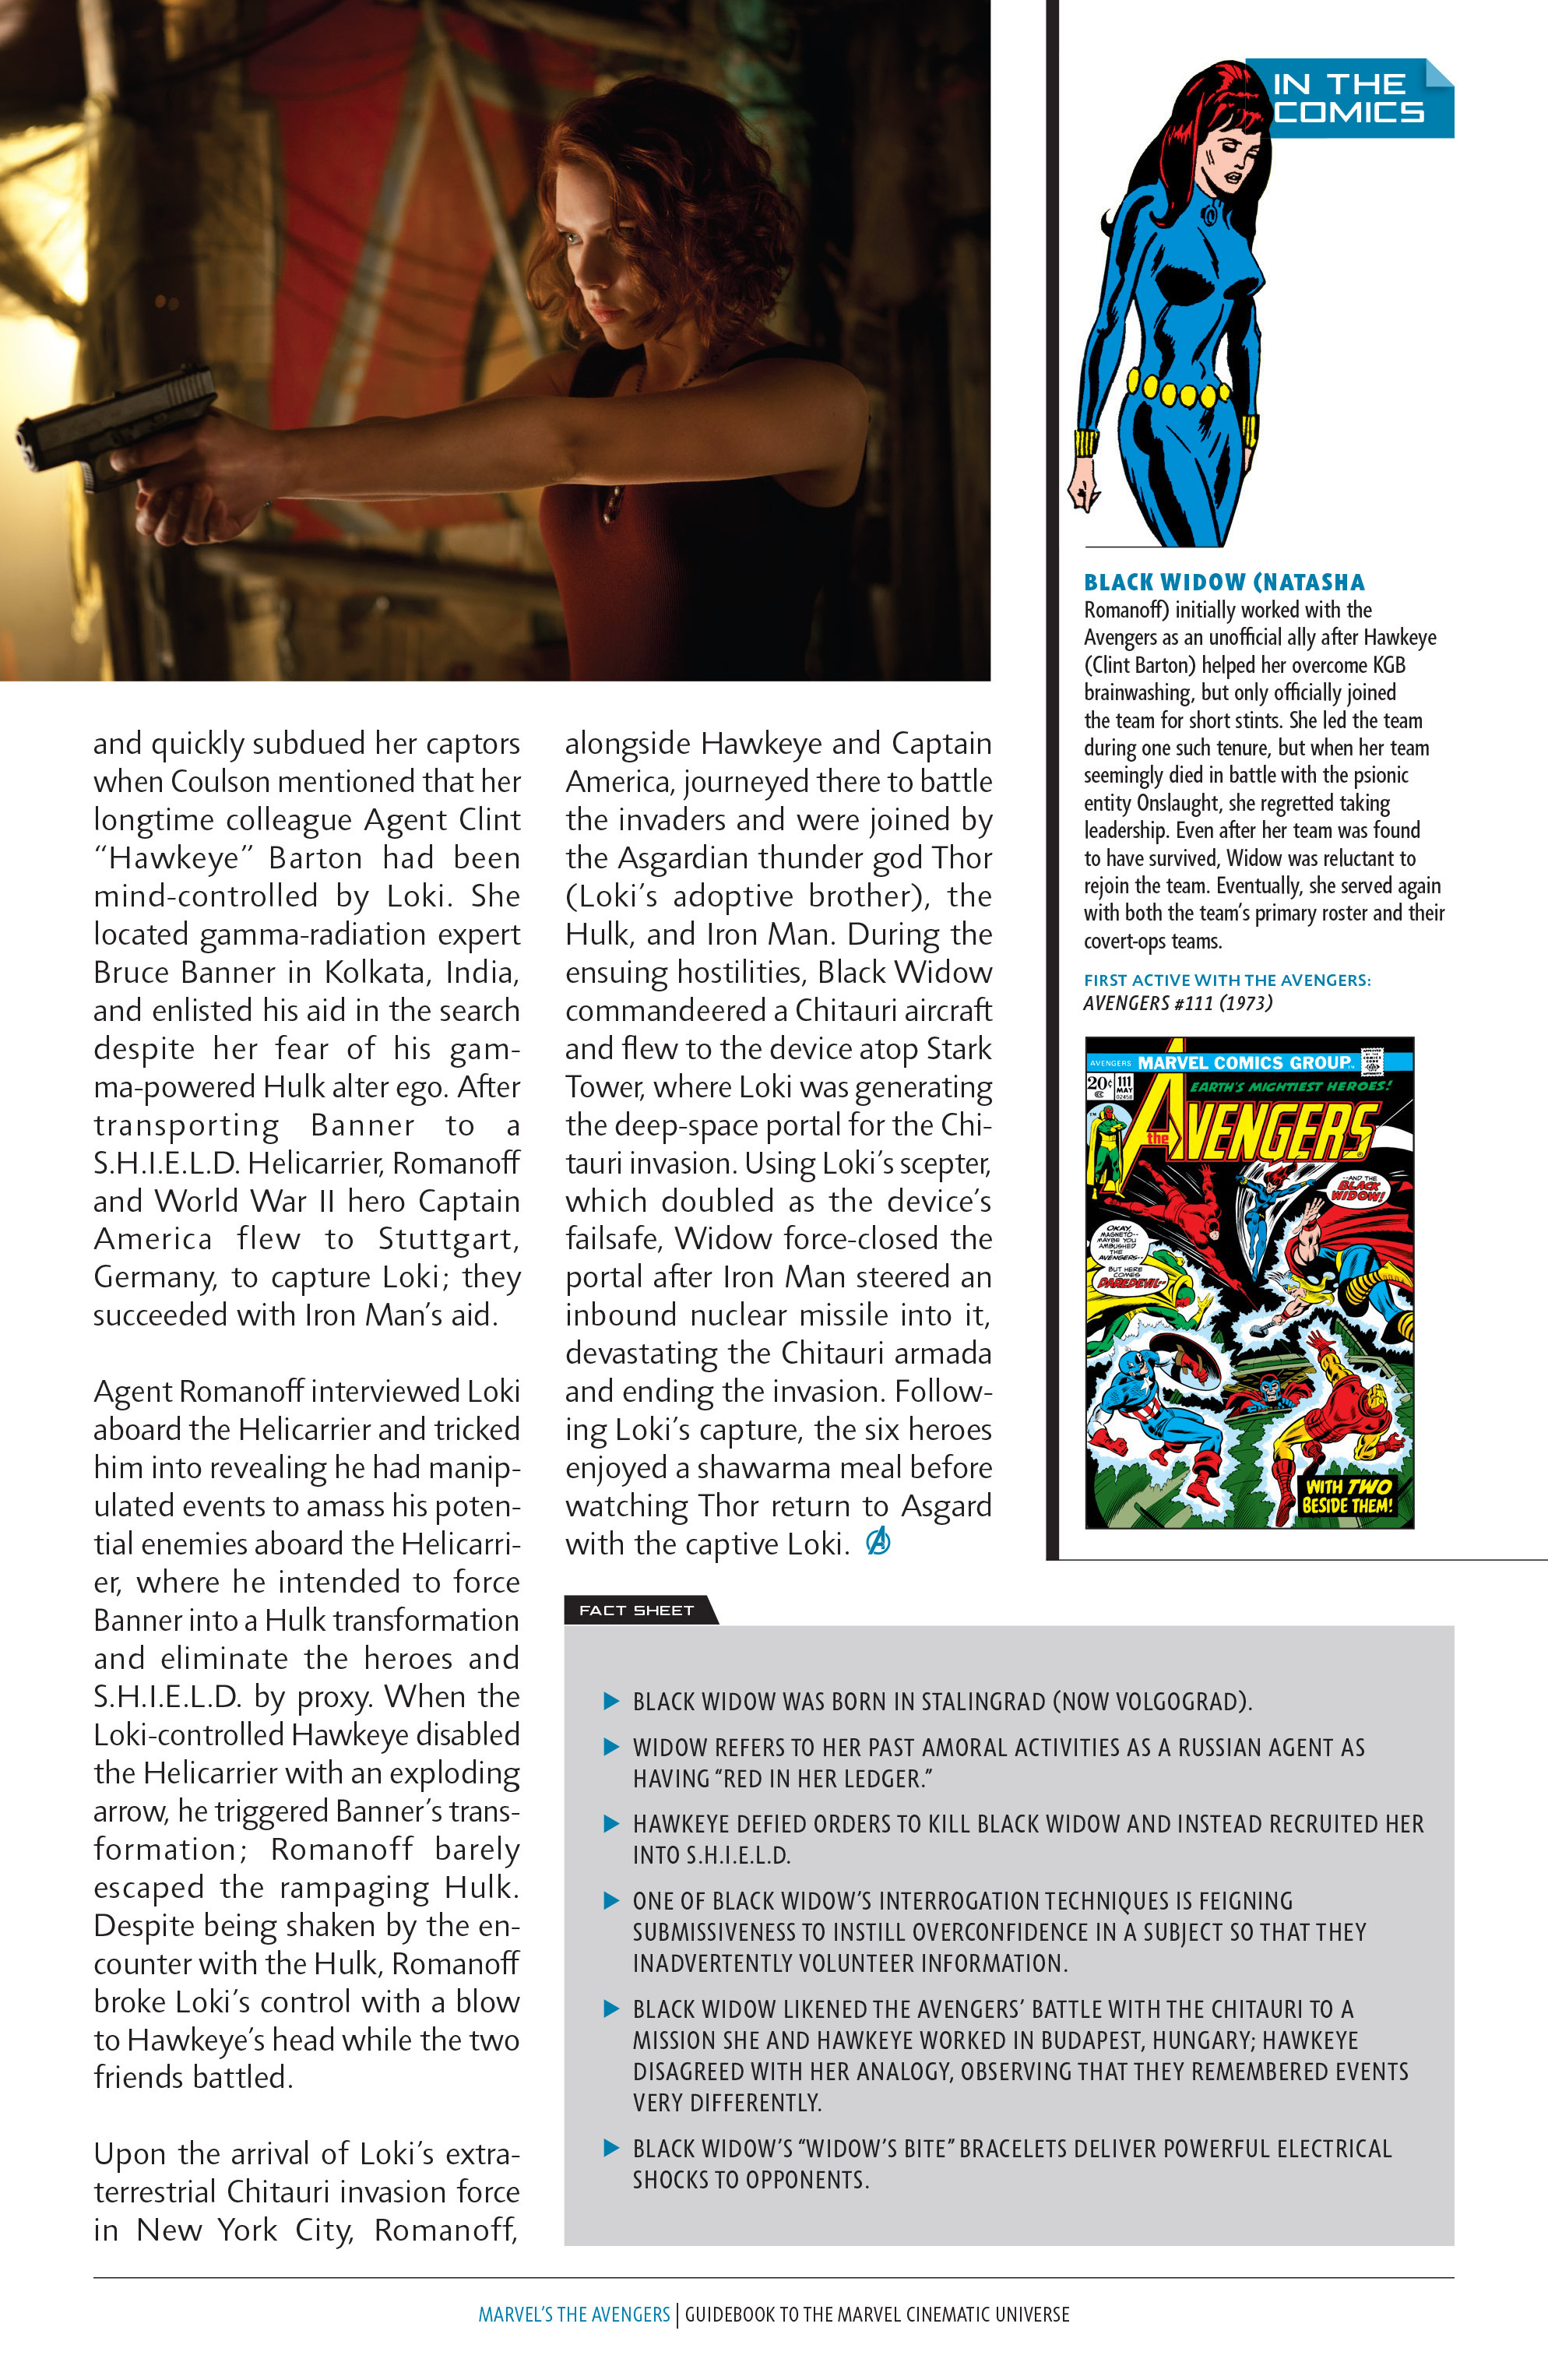 Read online Marvel Cinematic Universe Guidebook comic -  Issue # TPB 1 (Part 2) - 30